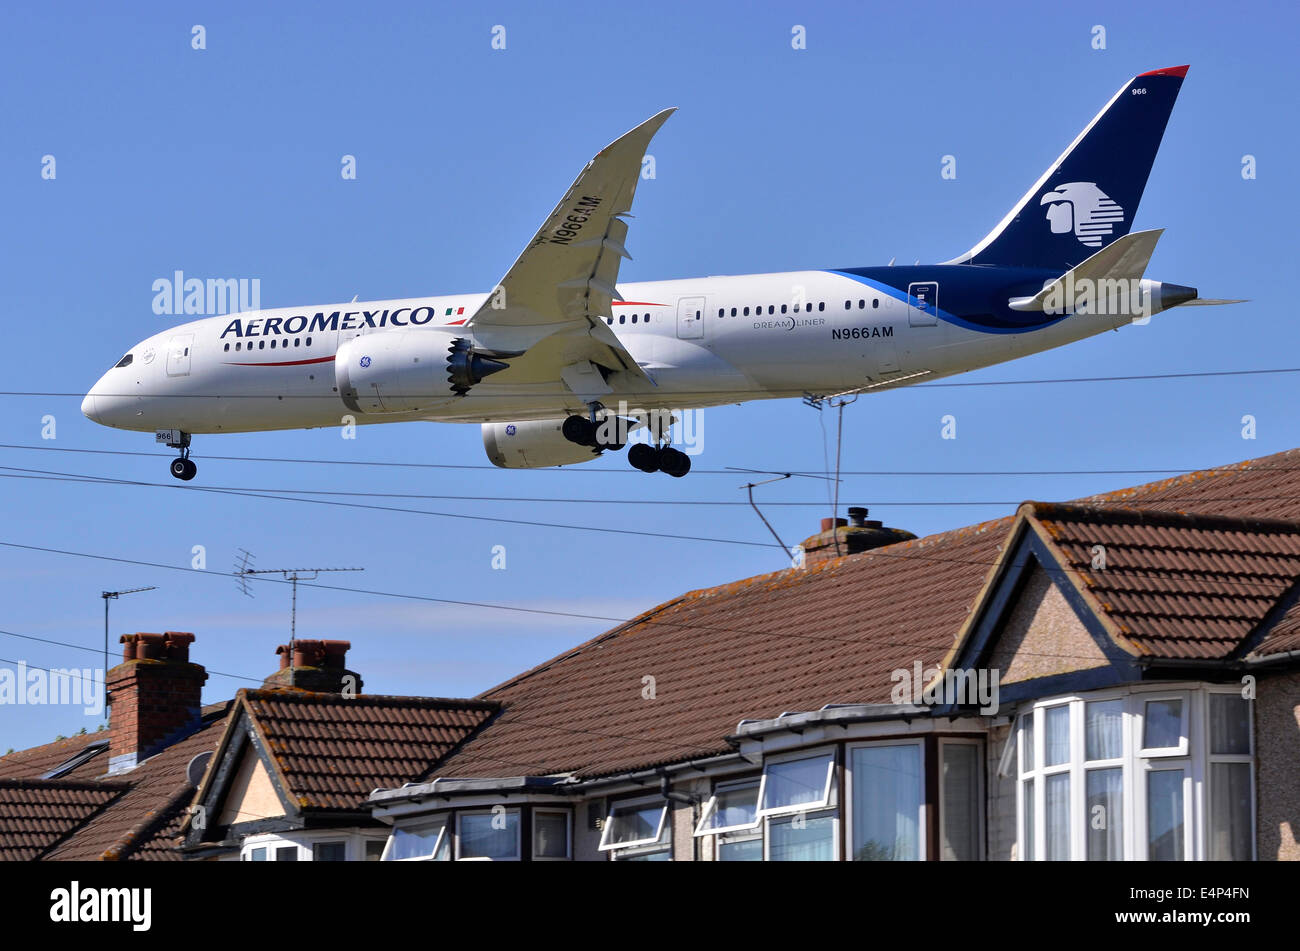 Heathrow runway approach by Boeing 787 Dreamliner, Aeromexico, plane on low landing approach for London Heathrow Airport, UK, with Myrtle Avenue houses in foreground. Stock Photo